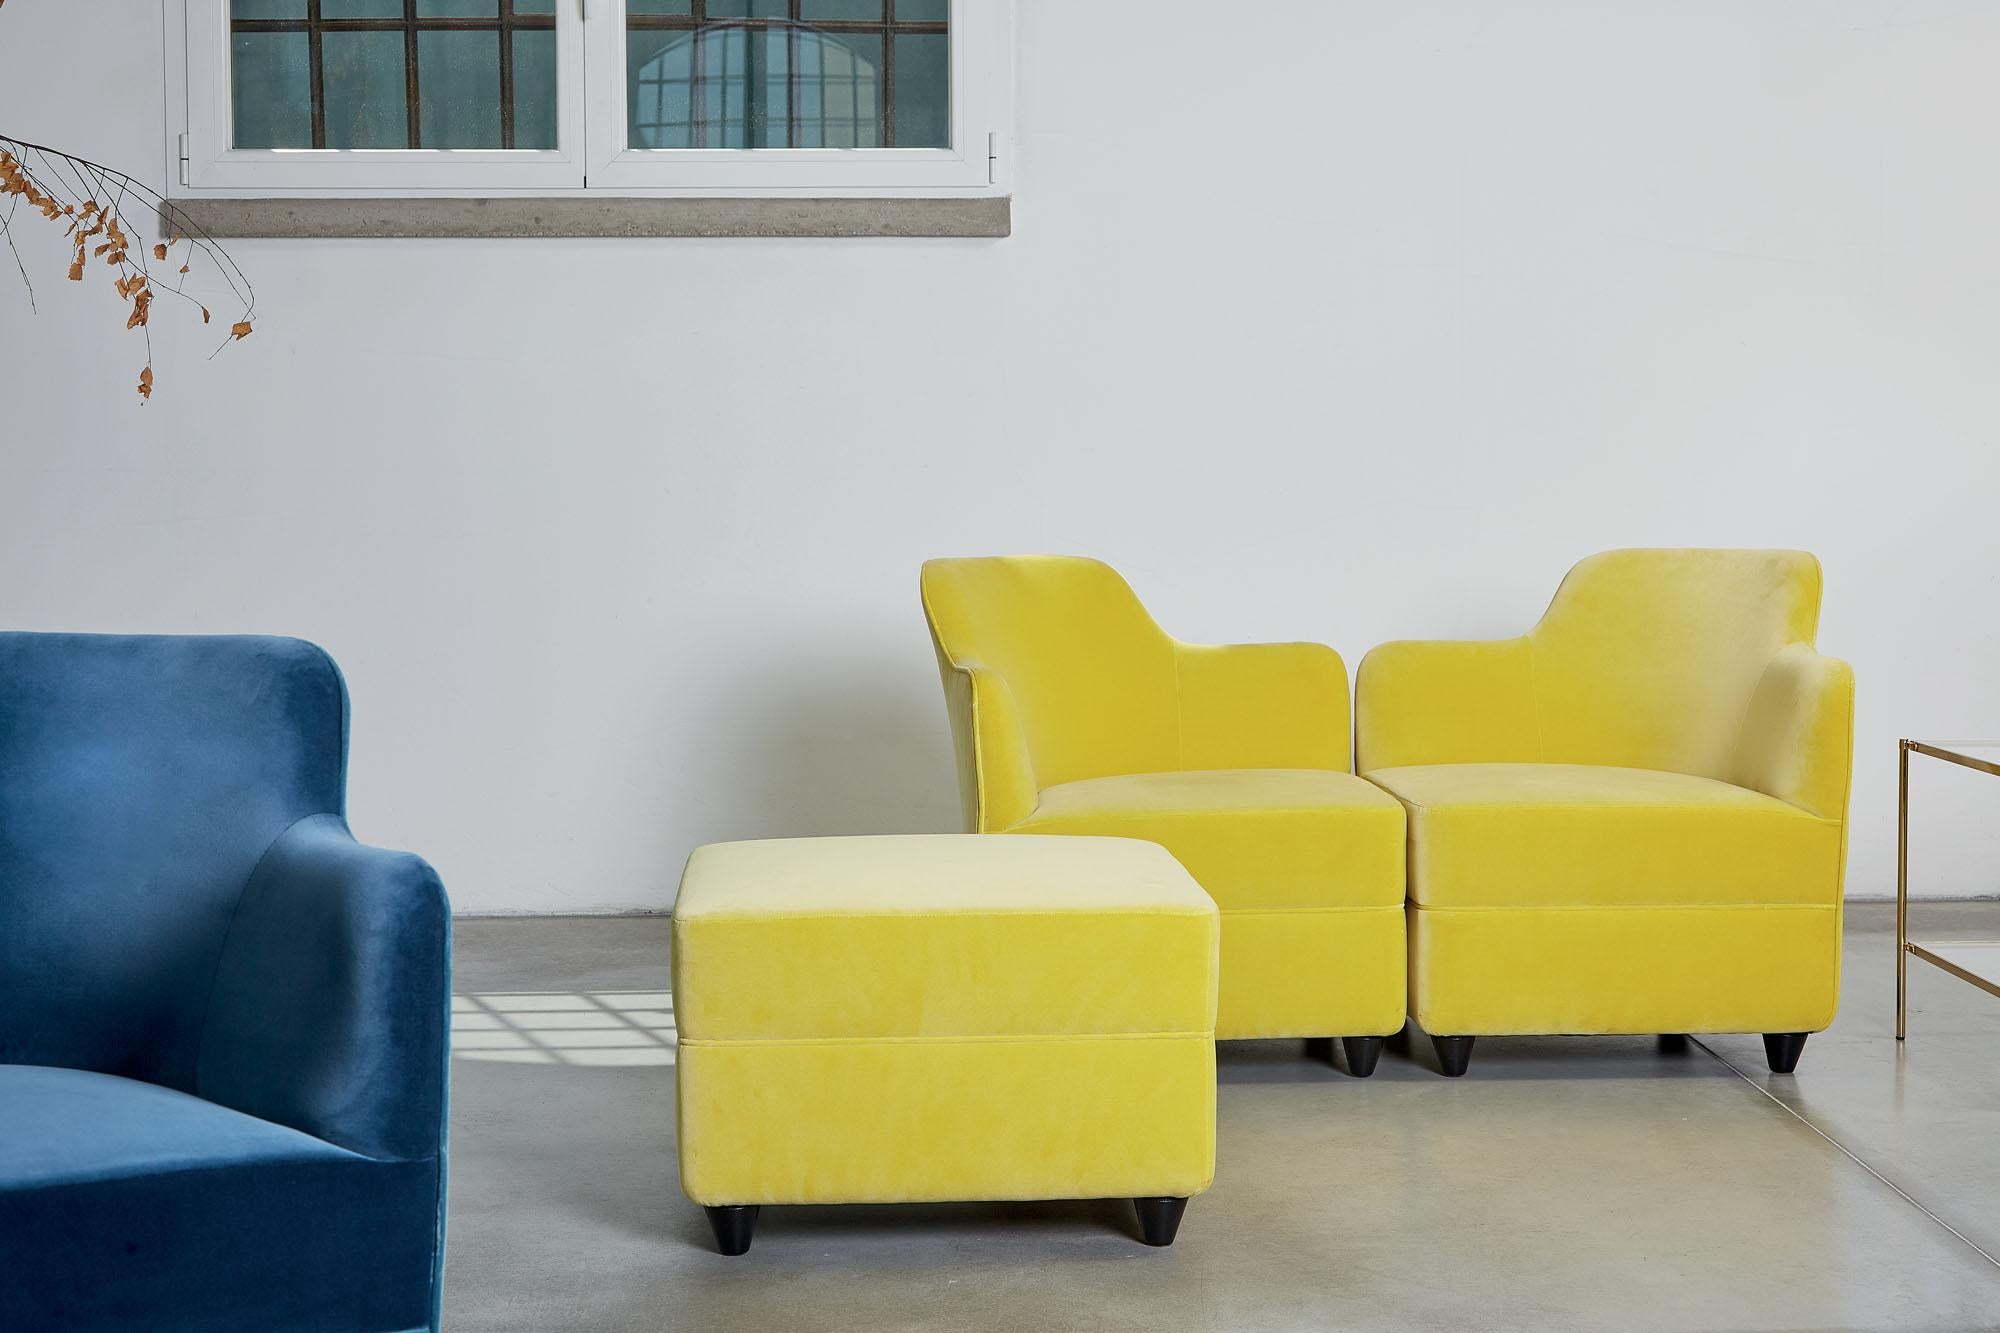 Small pouf with velvet upholstery in a wide range of colors. It can be combined with other armchairs or pouf modules to create bigger, modular combinations.
Corrado Corradi Dell'acqua in 1963 reinvented the angular shaped armchair that pampers those